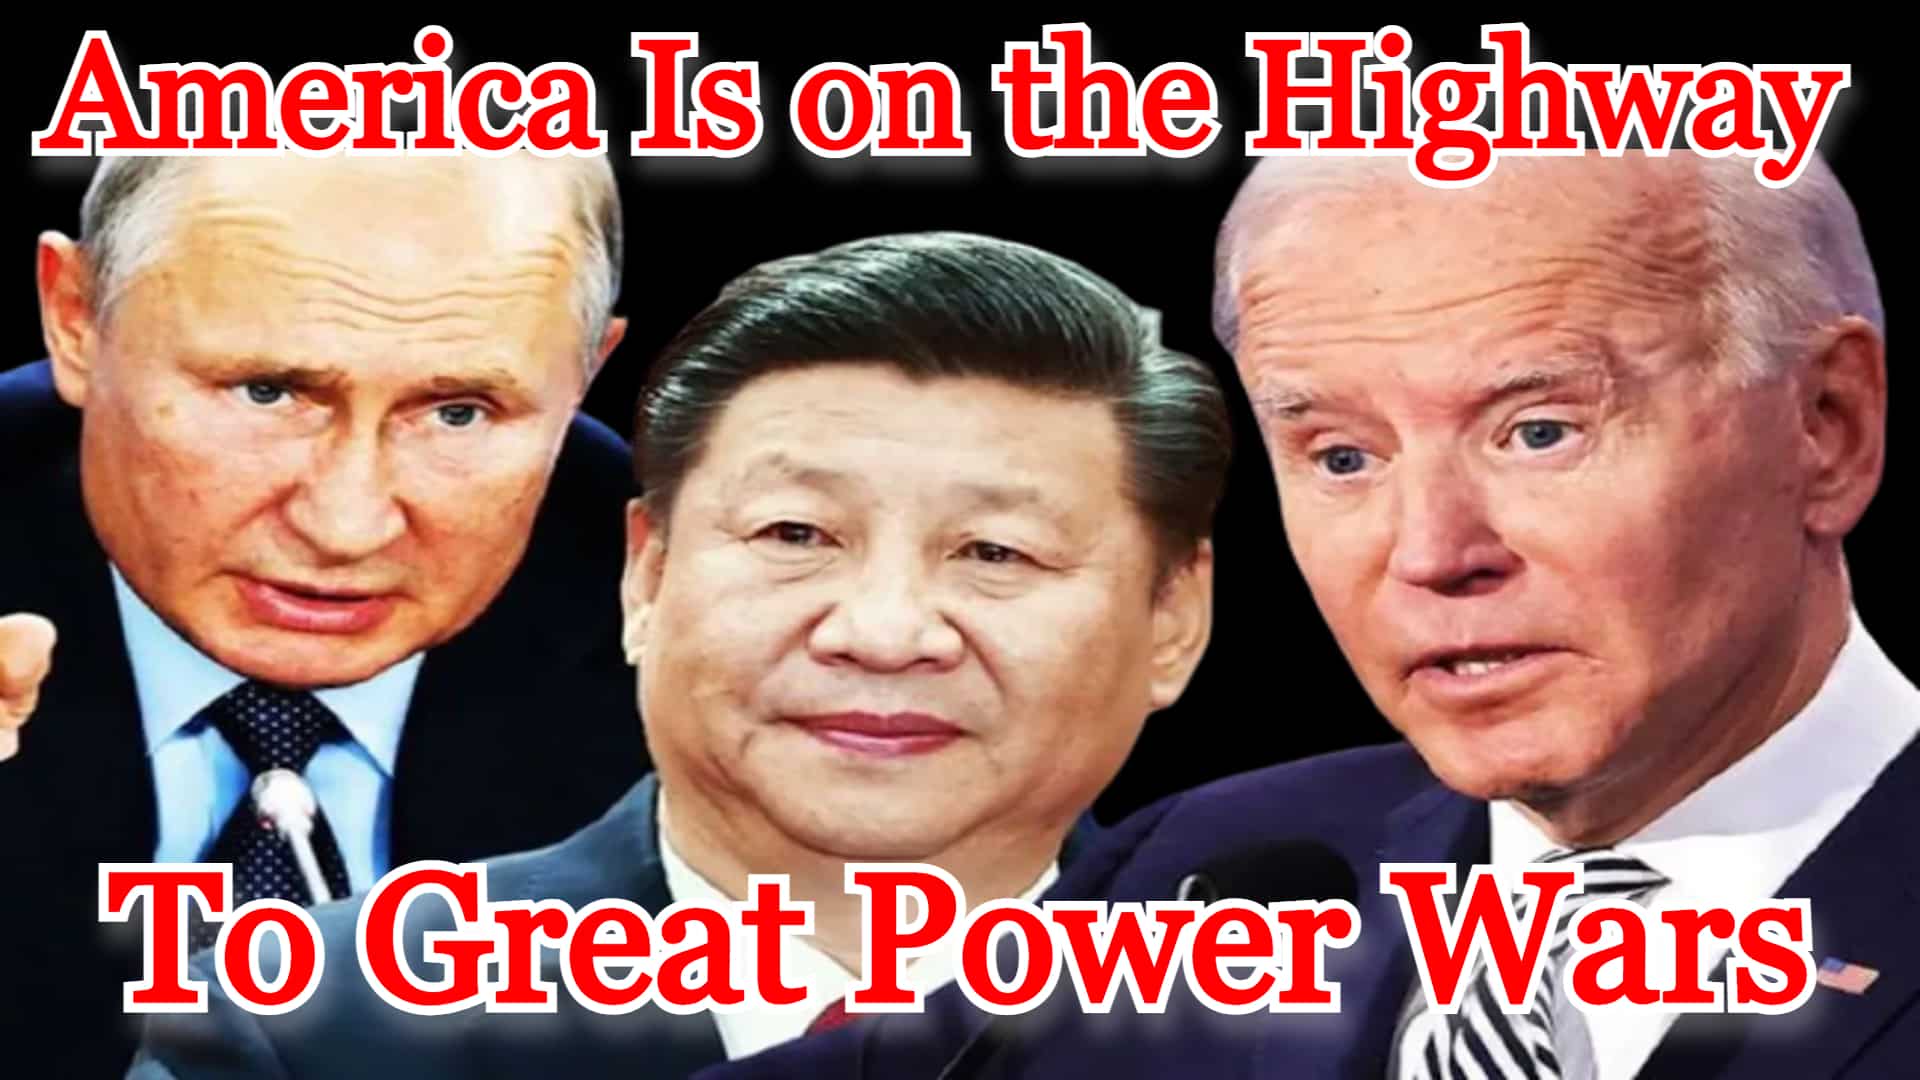 COI #281: America Is on the Highway to Great Power Wars